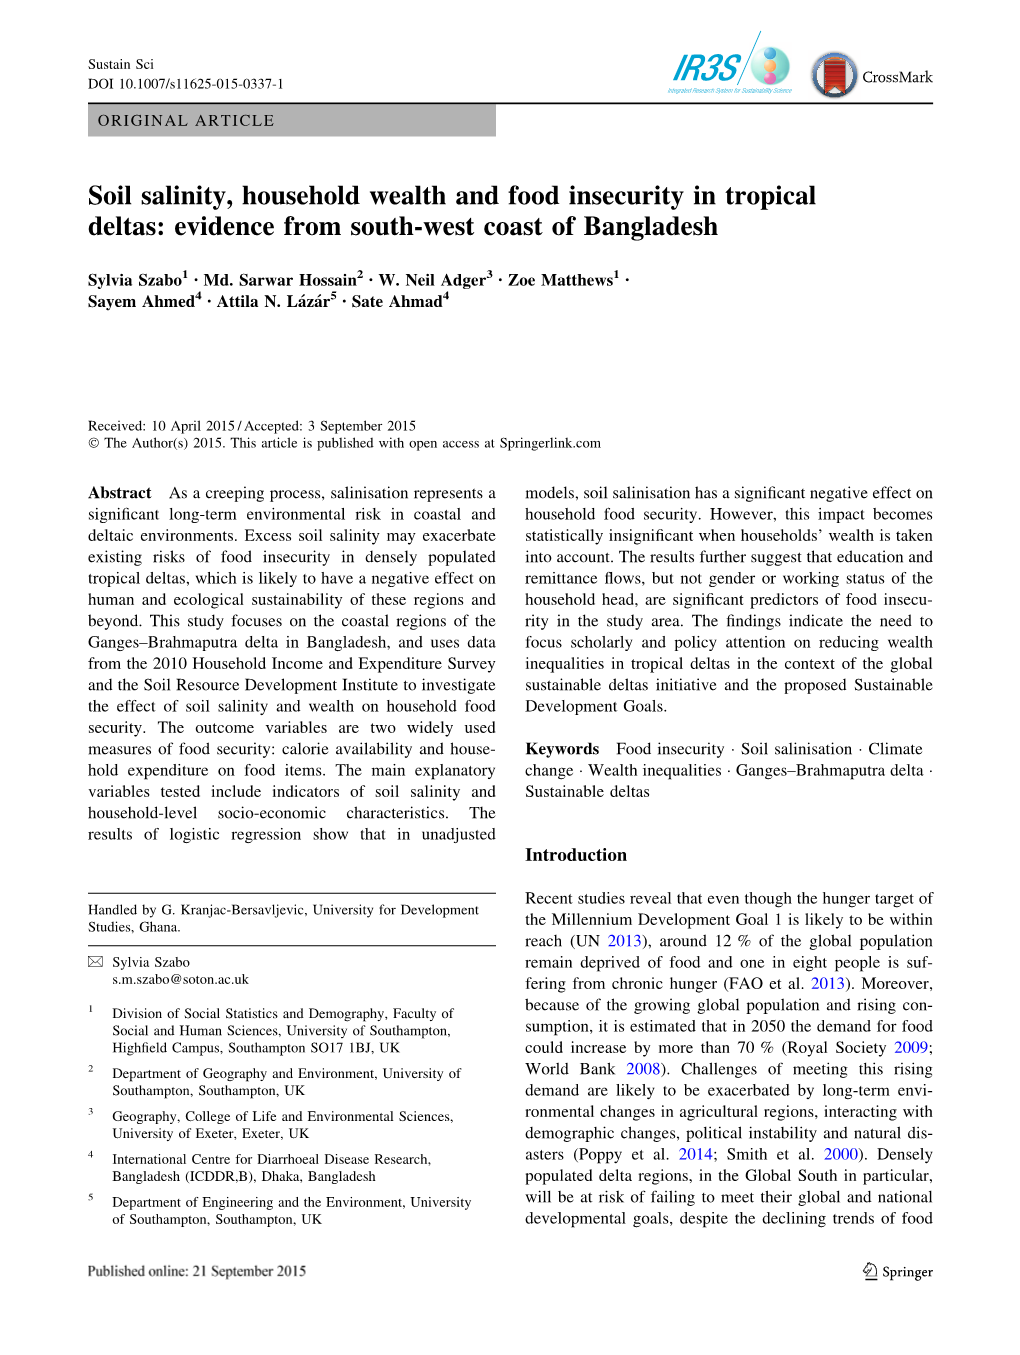 Soil Salinity, Household Wealth and Food Insecurity in Tropical Deltas: Evidence from South-West Coast of Bangladesh